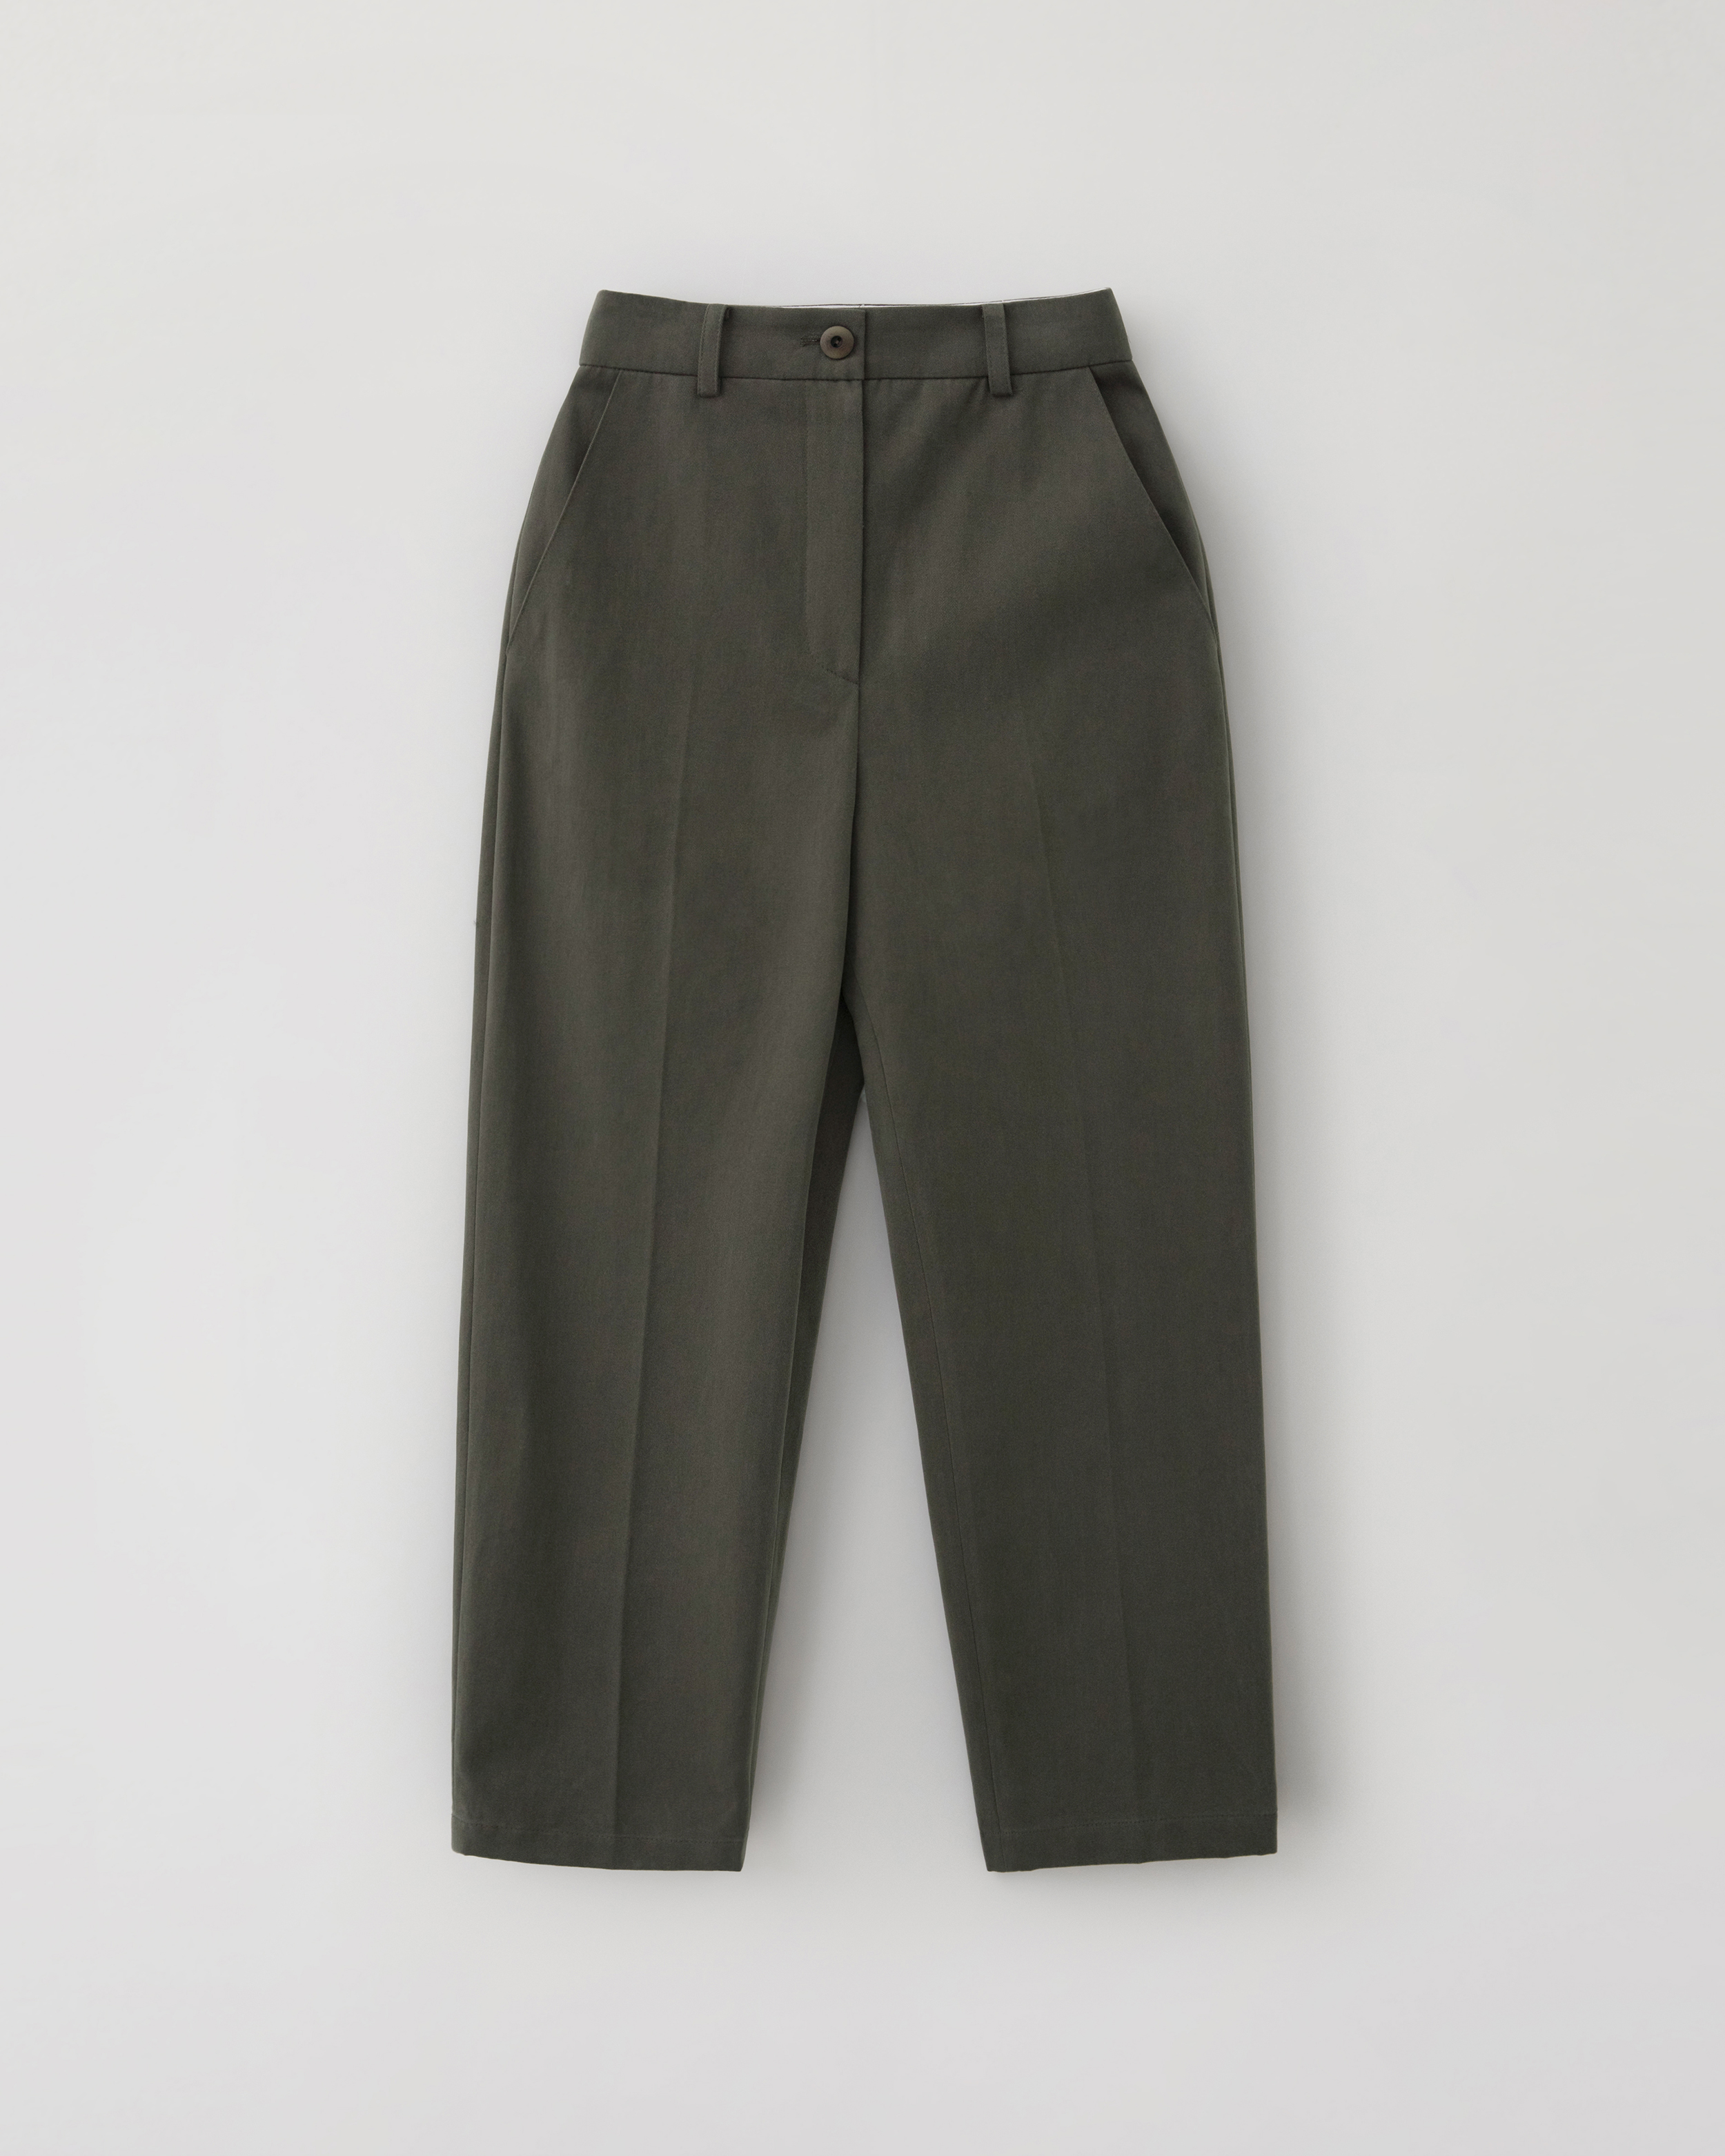 Mos round pants - charcoal